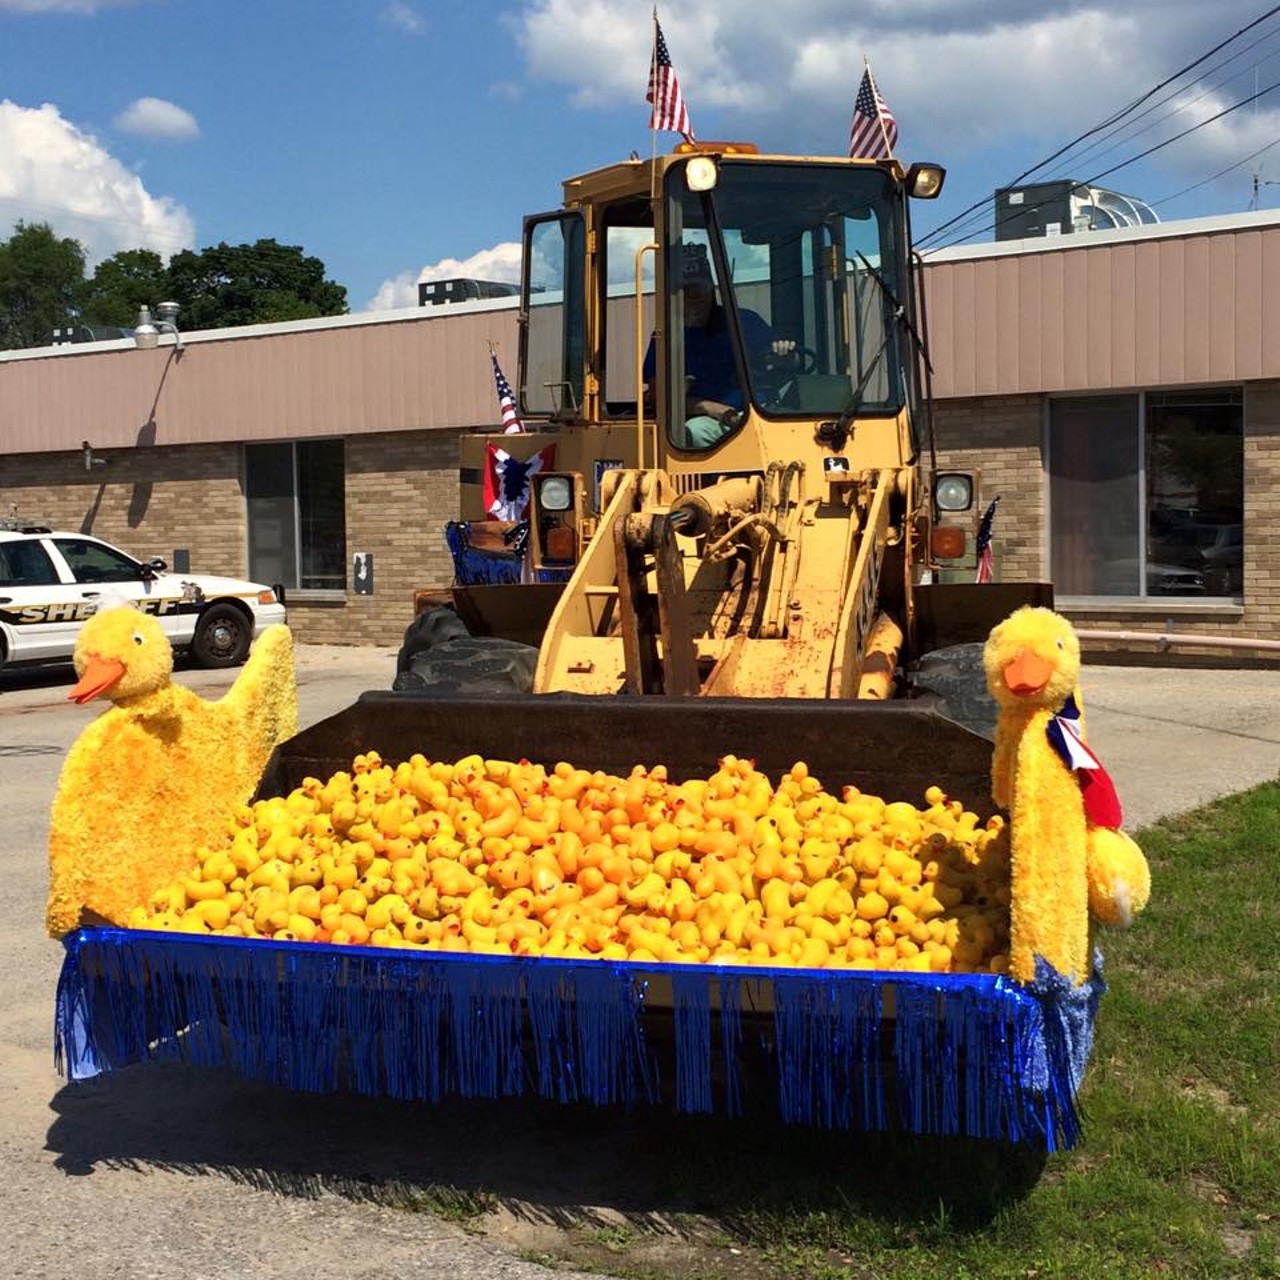  Rubber Ducky Festival
When:  August 20
Where: Bellaire
What: Does witnessing a slow-to-medium-speed race of over 2,000 rubber ducky toys down a quarter-mile stretch of river sound fun to you?!? It should. (Photo via Facebook)